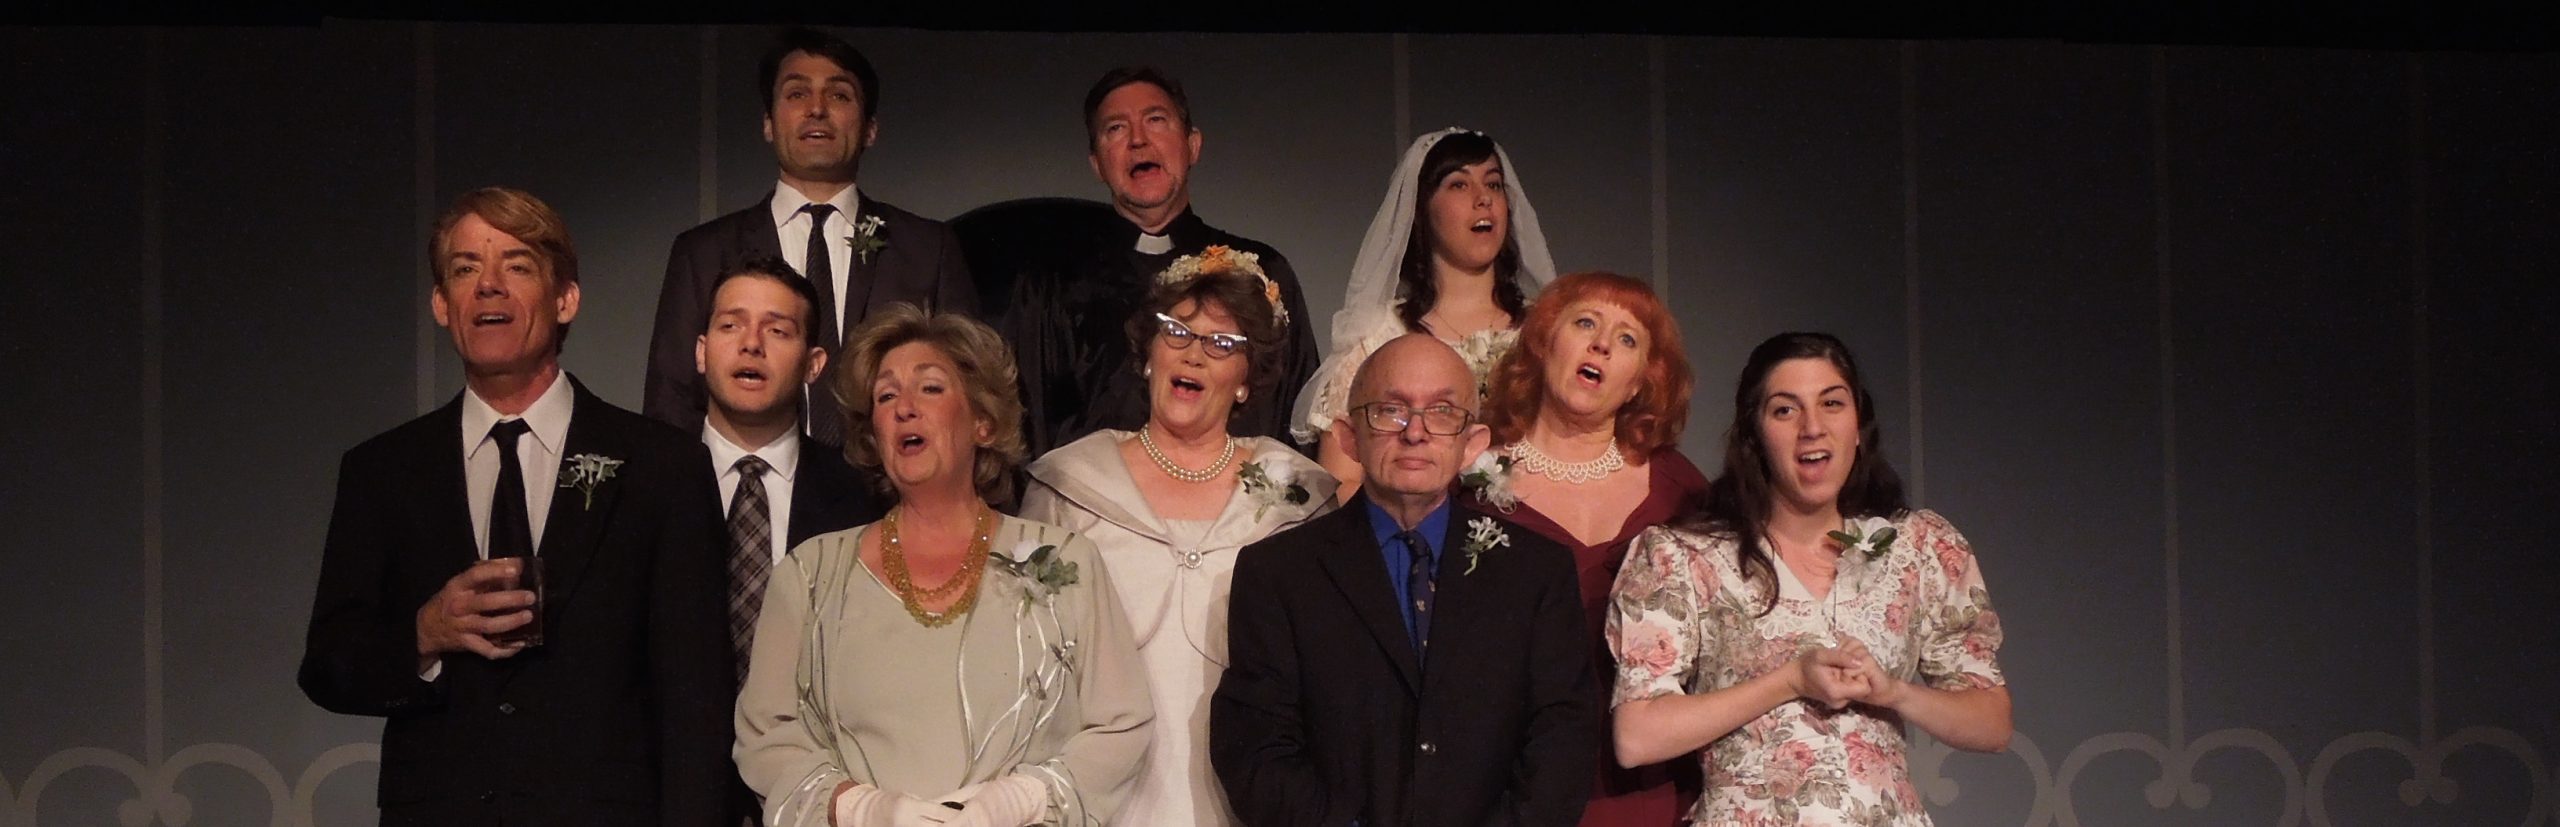 The Darkest Family Matters : The Marriage of Bette and Boo @ Costa Mesa Playhouse in Costa Mesa - Review